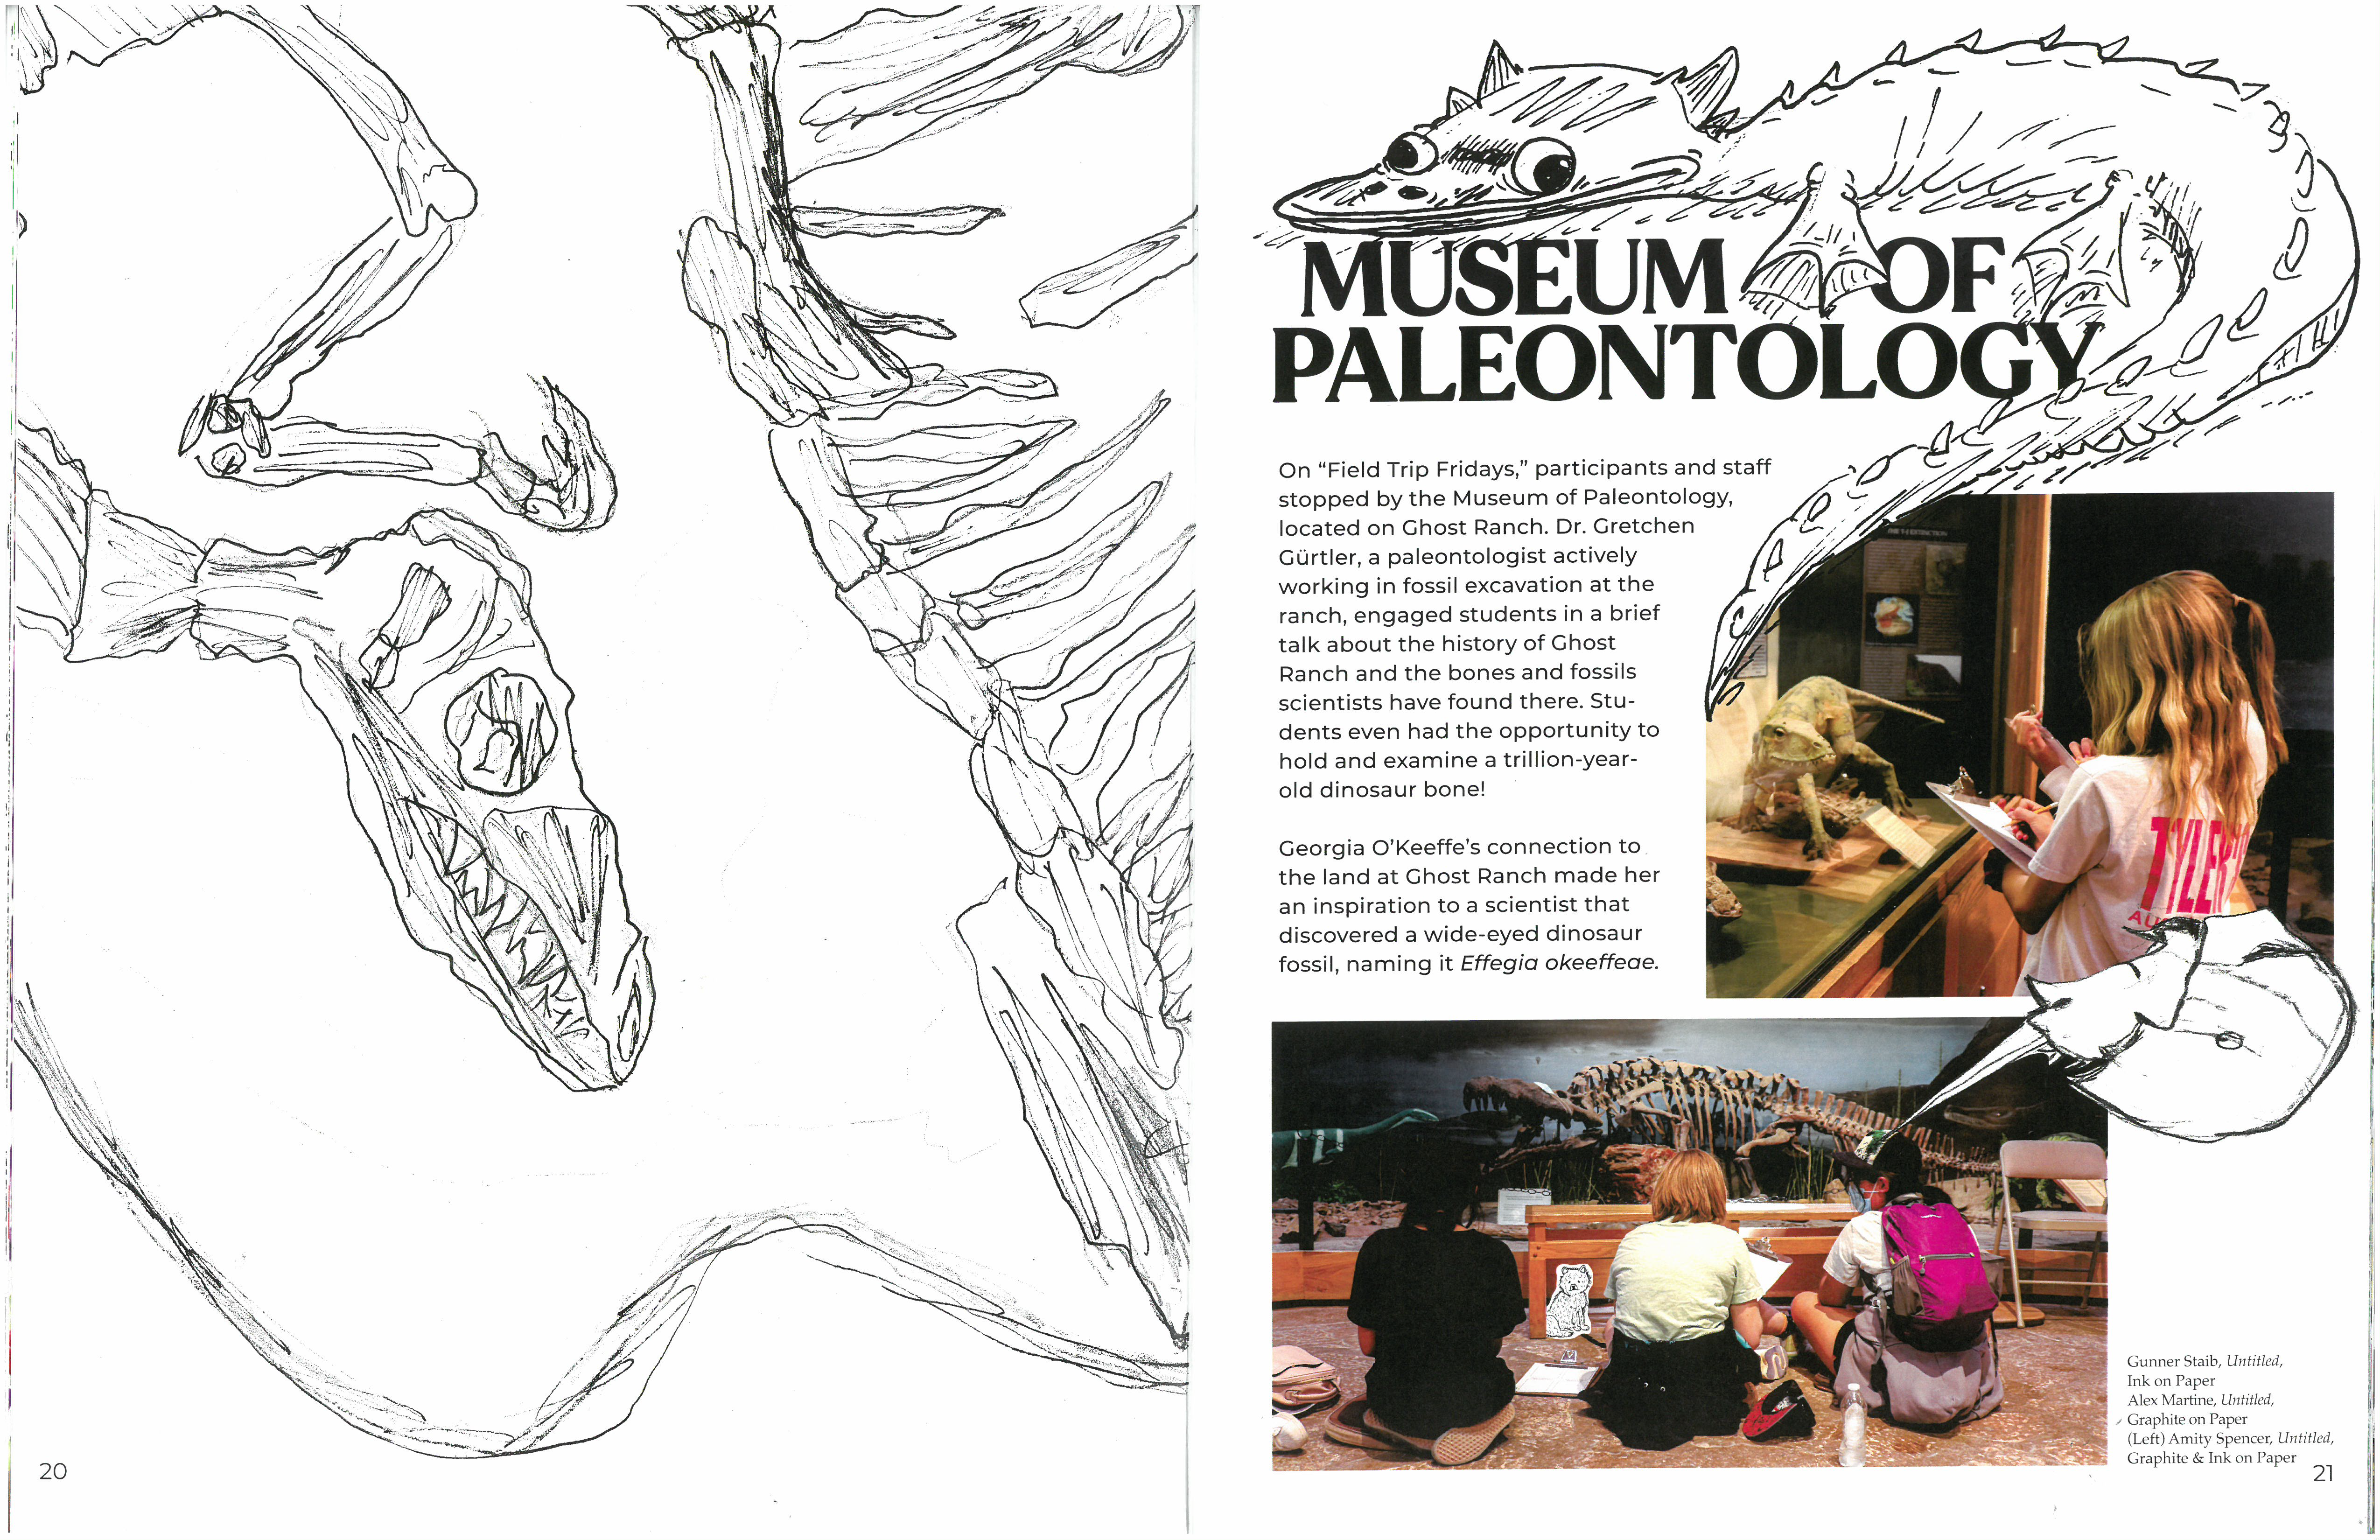 Illustrations by students as well as photos from their field trip to the Museum of Paleontology